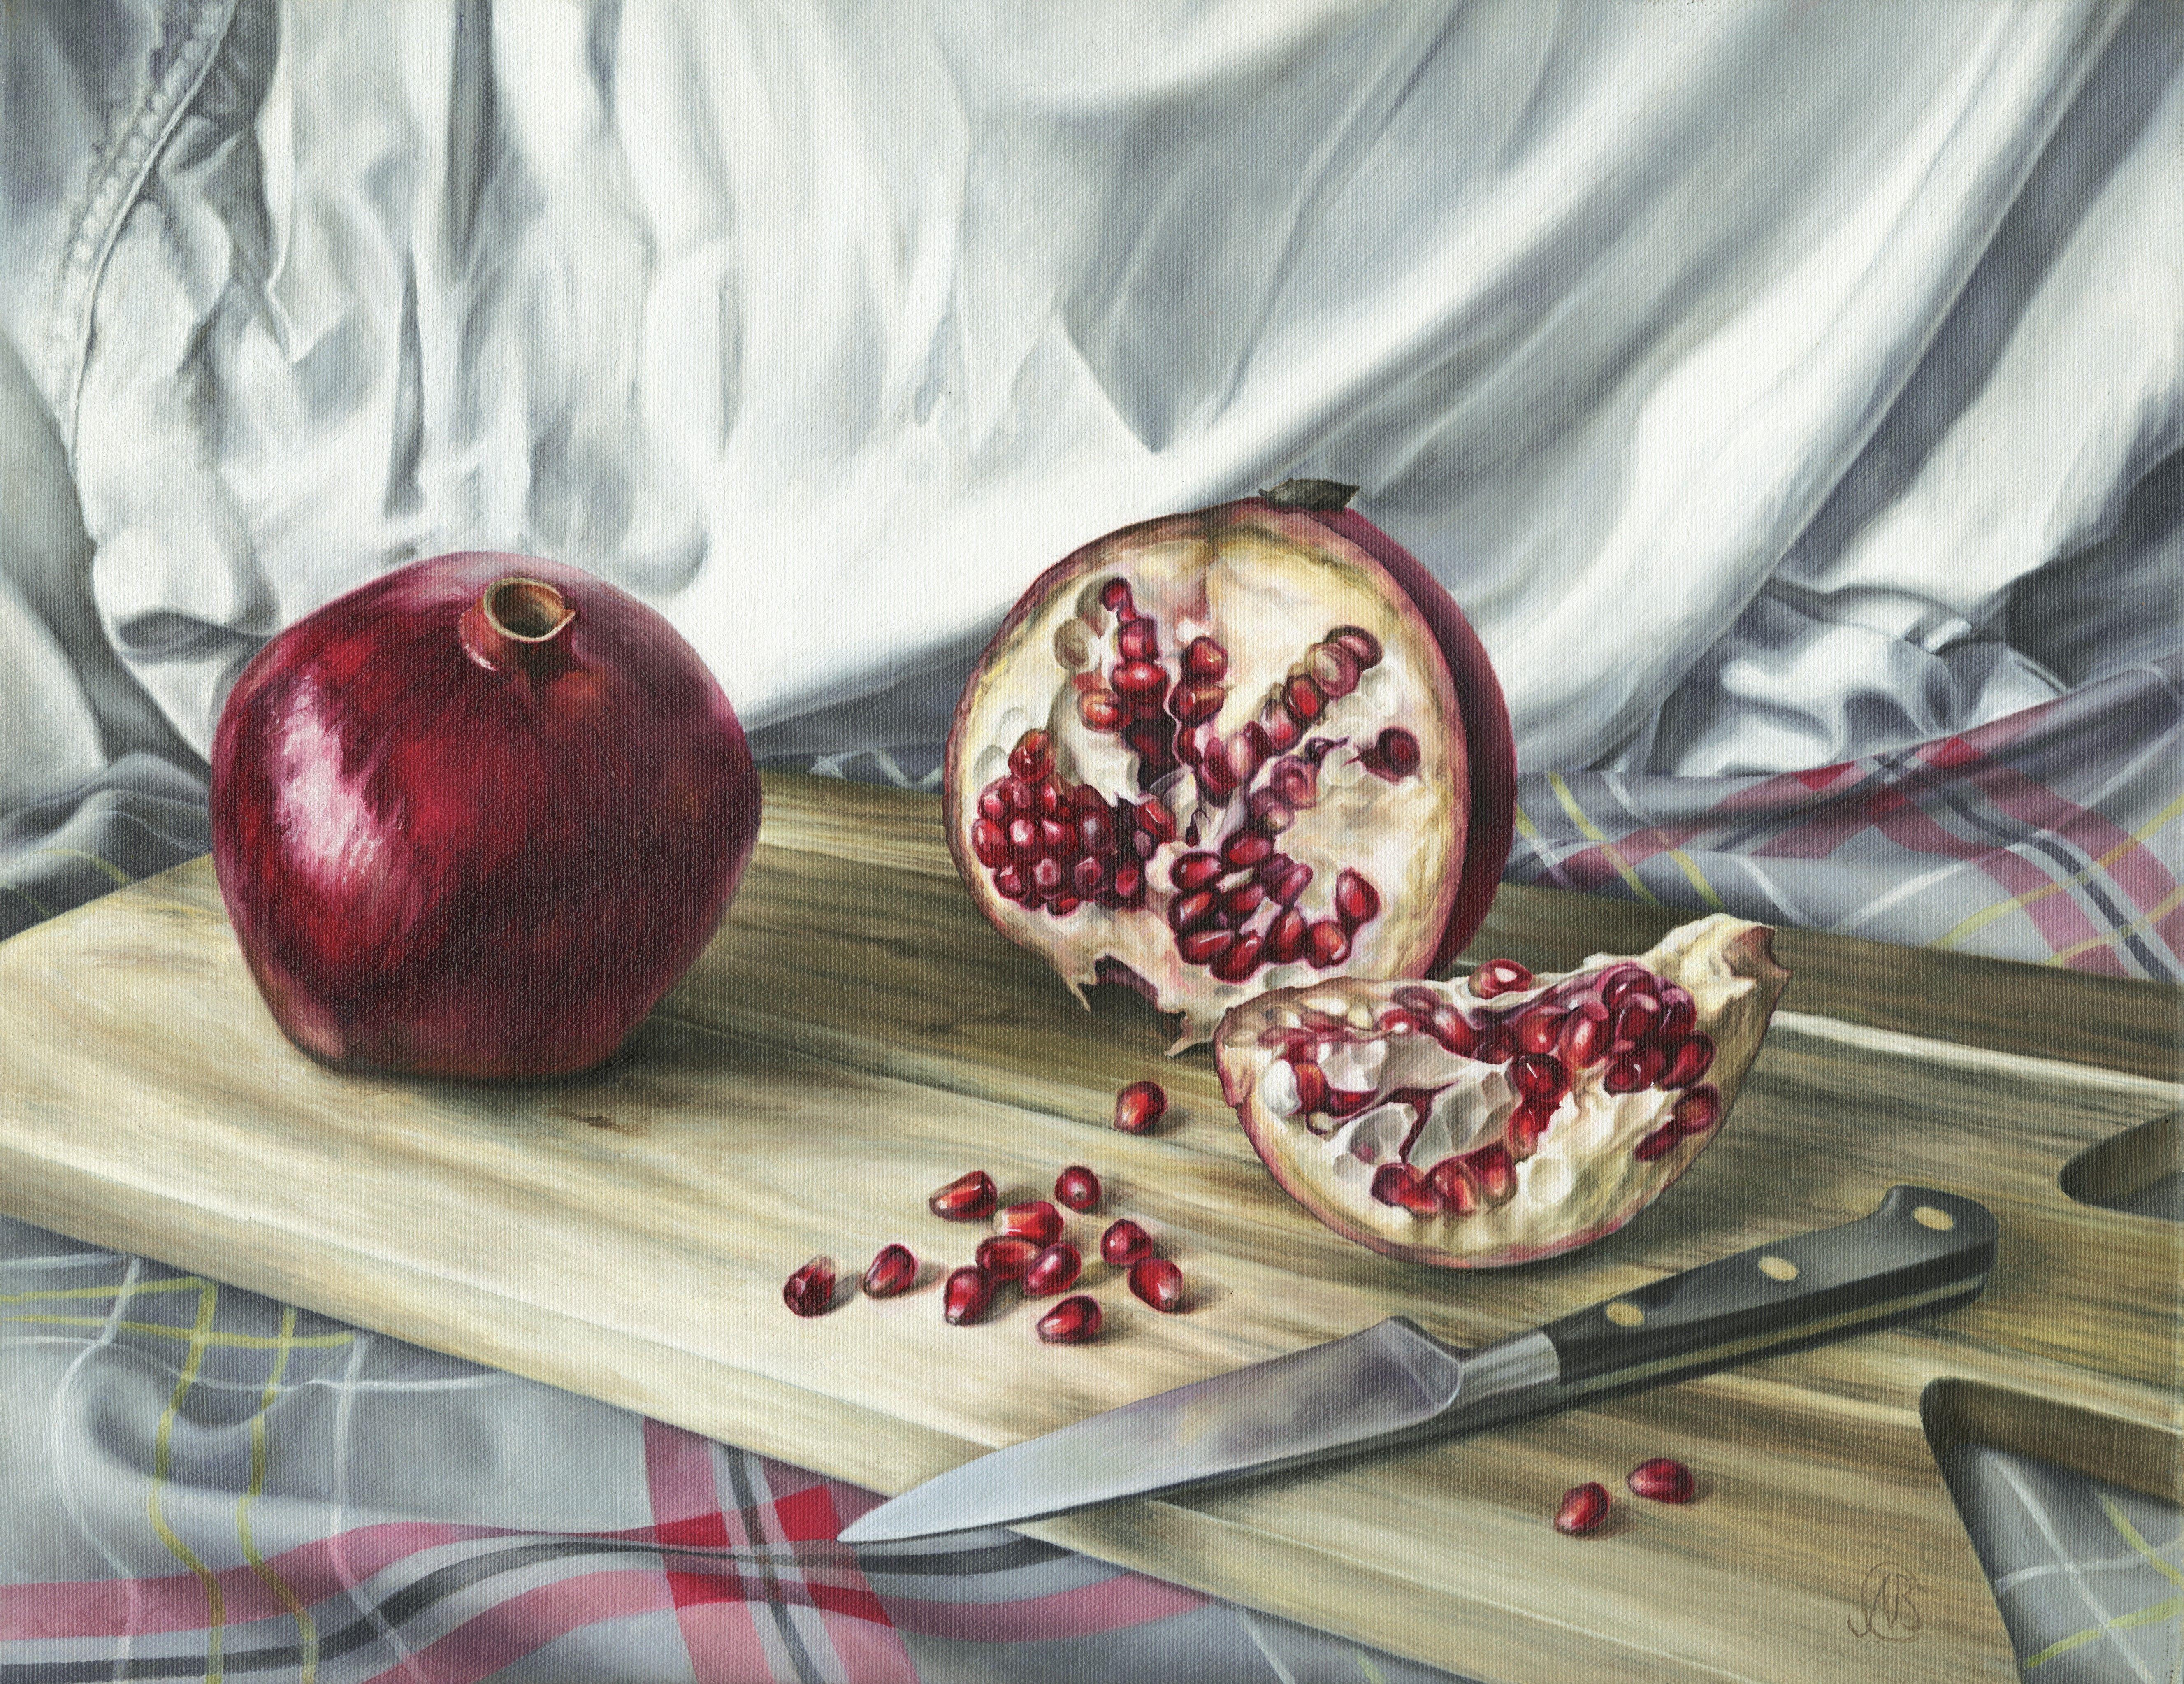 As a fruit, the pomegranate has always been exotic to me, like a jewellery box full of rubies from afar.  As an object of art they excite me, it has always been interesting to uncover the meaning and symbolism in the paintings of the old masters. 